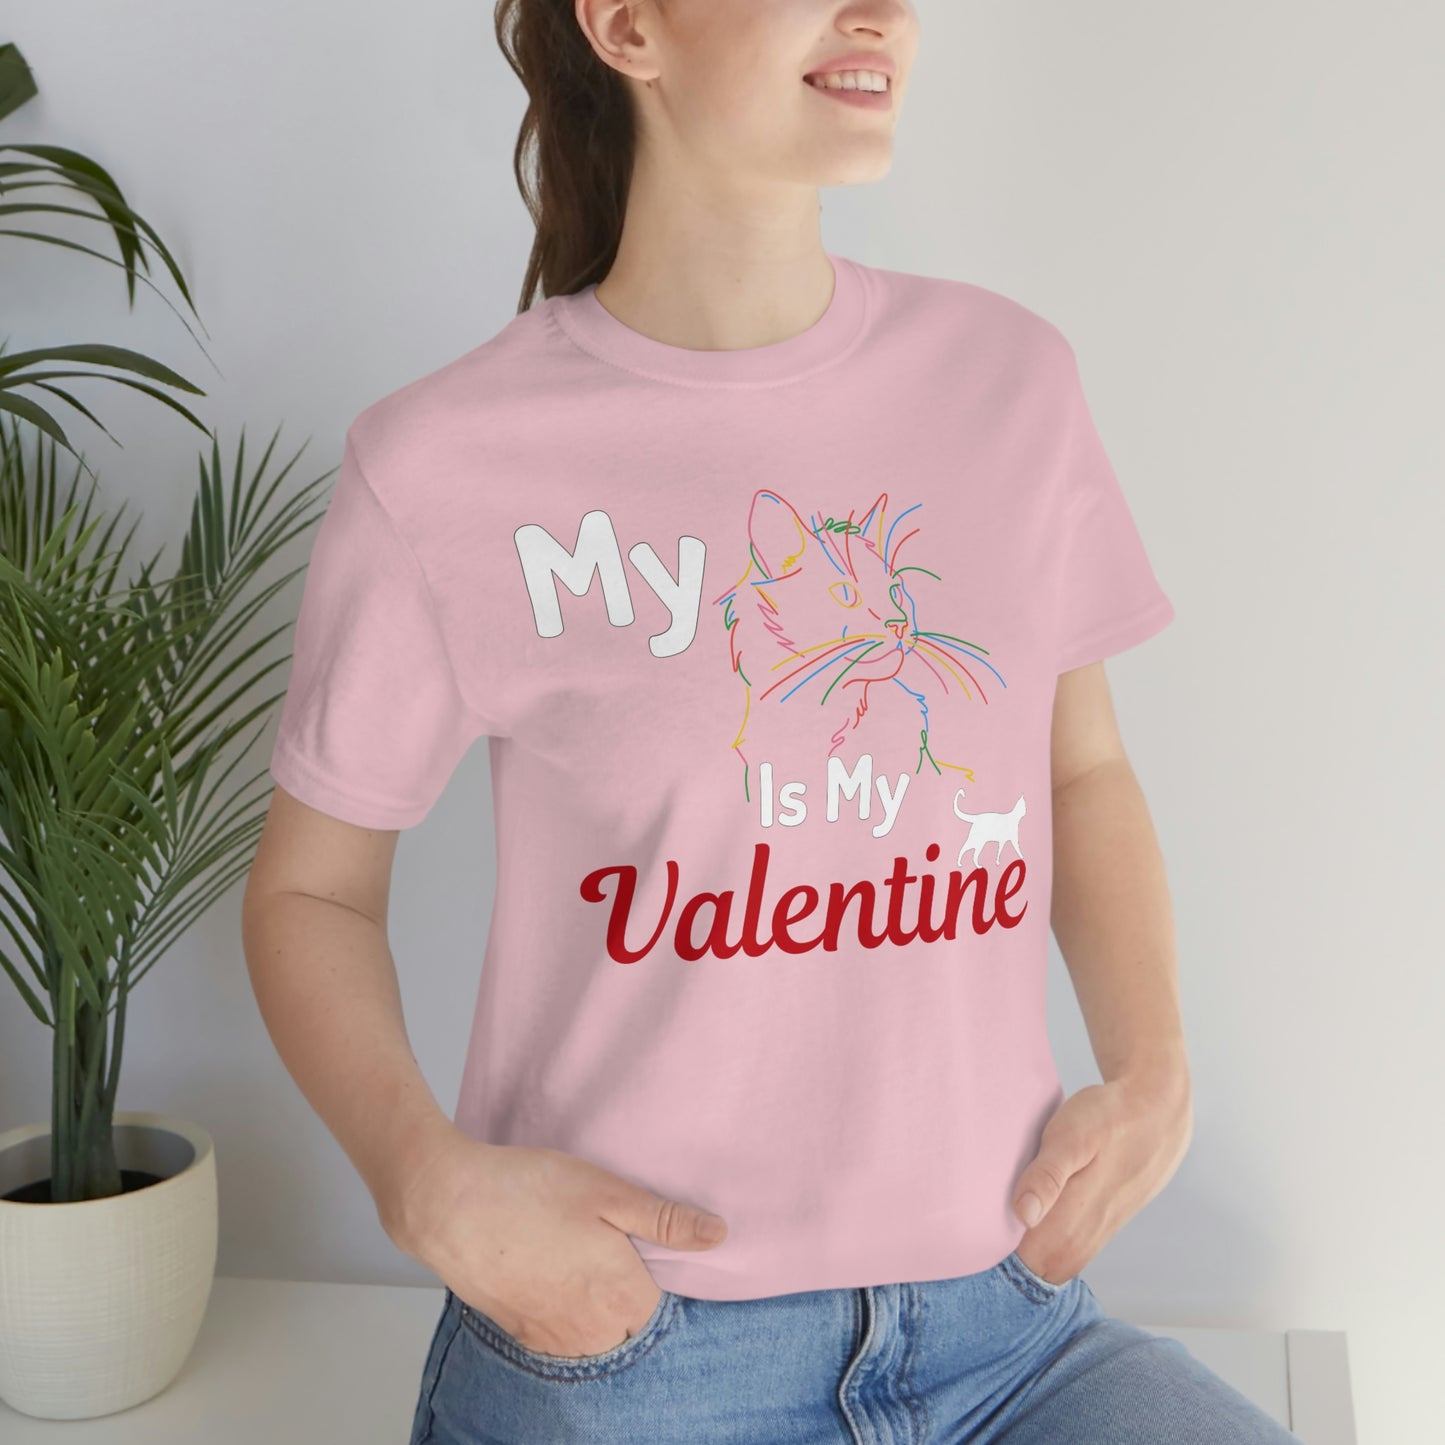 My Cat is My Valentine, Cute Pet lover Valentine shirt - Cute Cat lover shirt - Cat Mom shirt